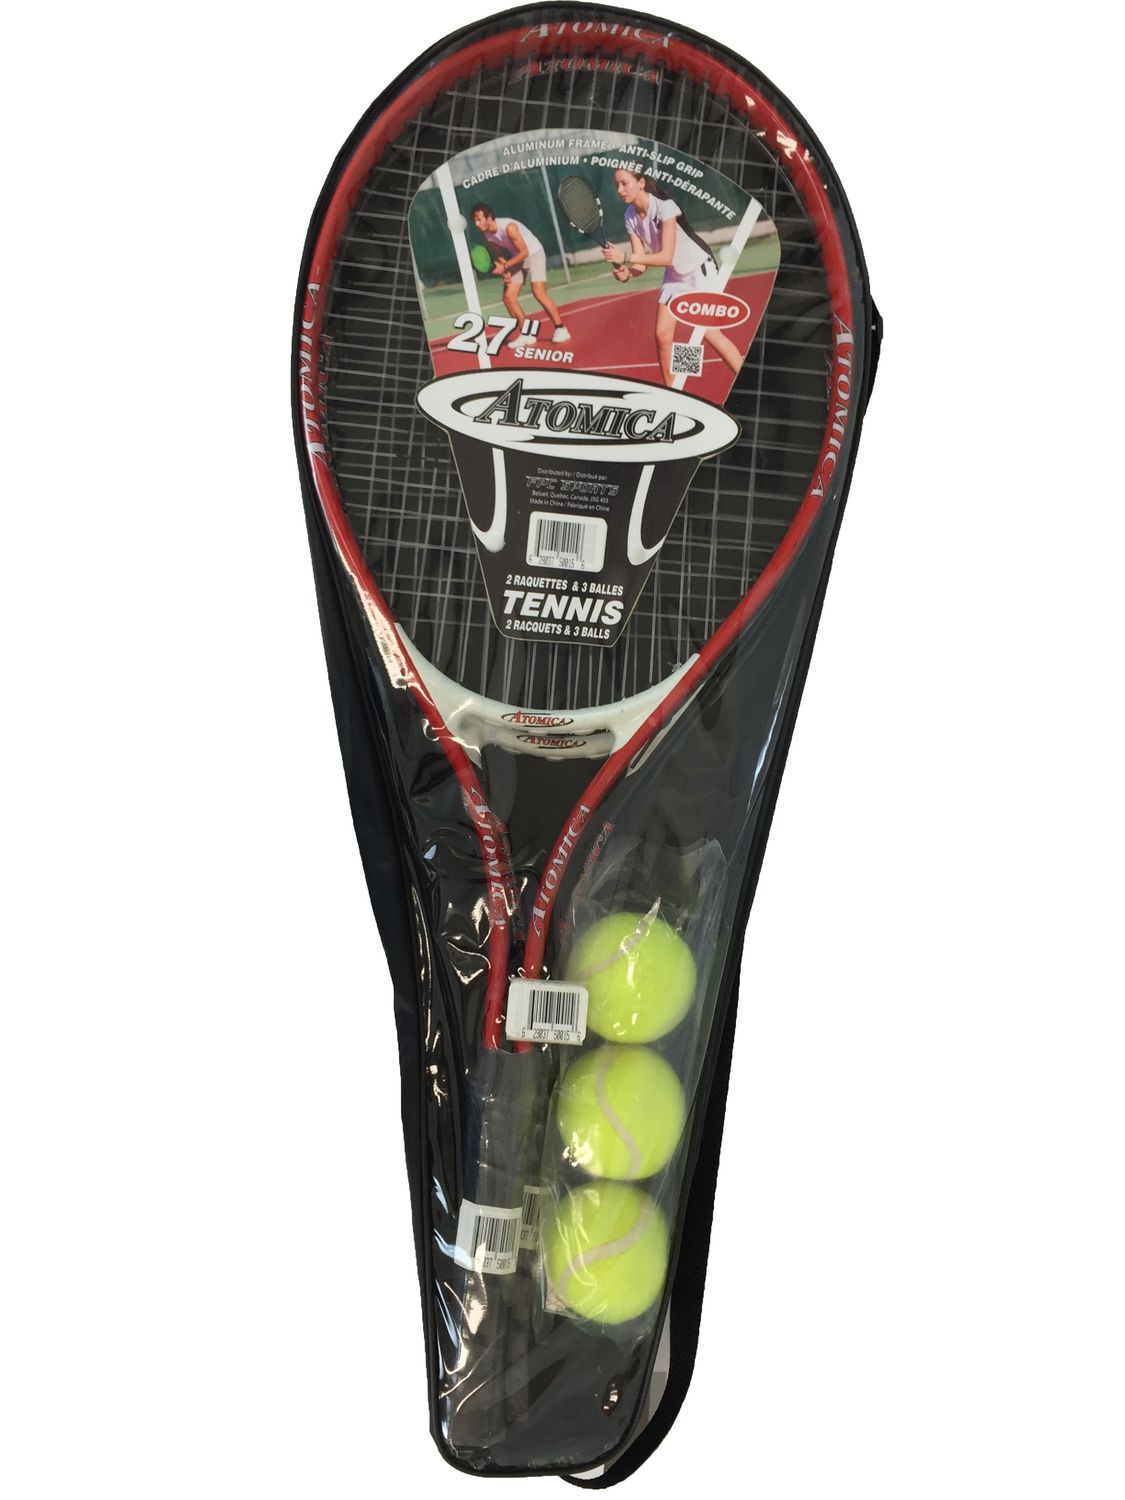 Tennis Racket Aluminium Tennis Racket Set with 2 Rackets,Suitable for All Ages New